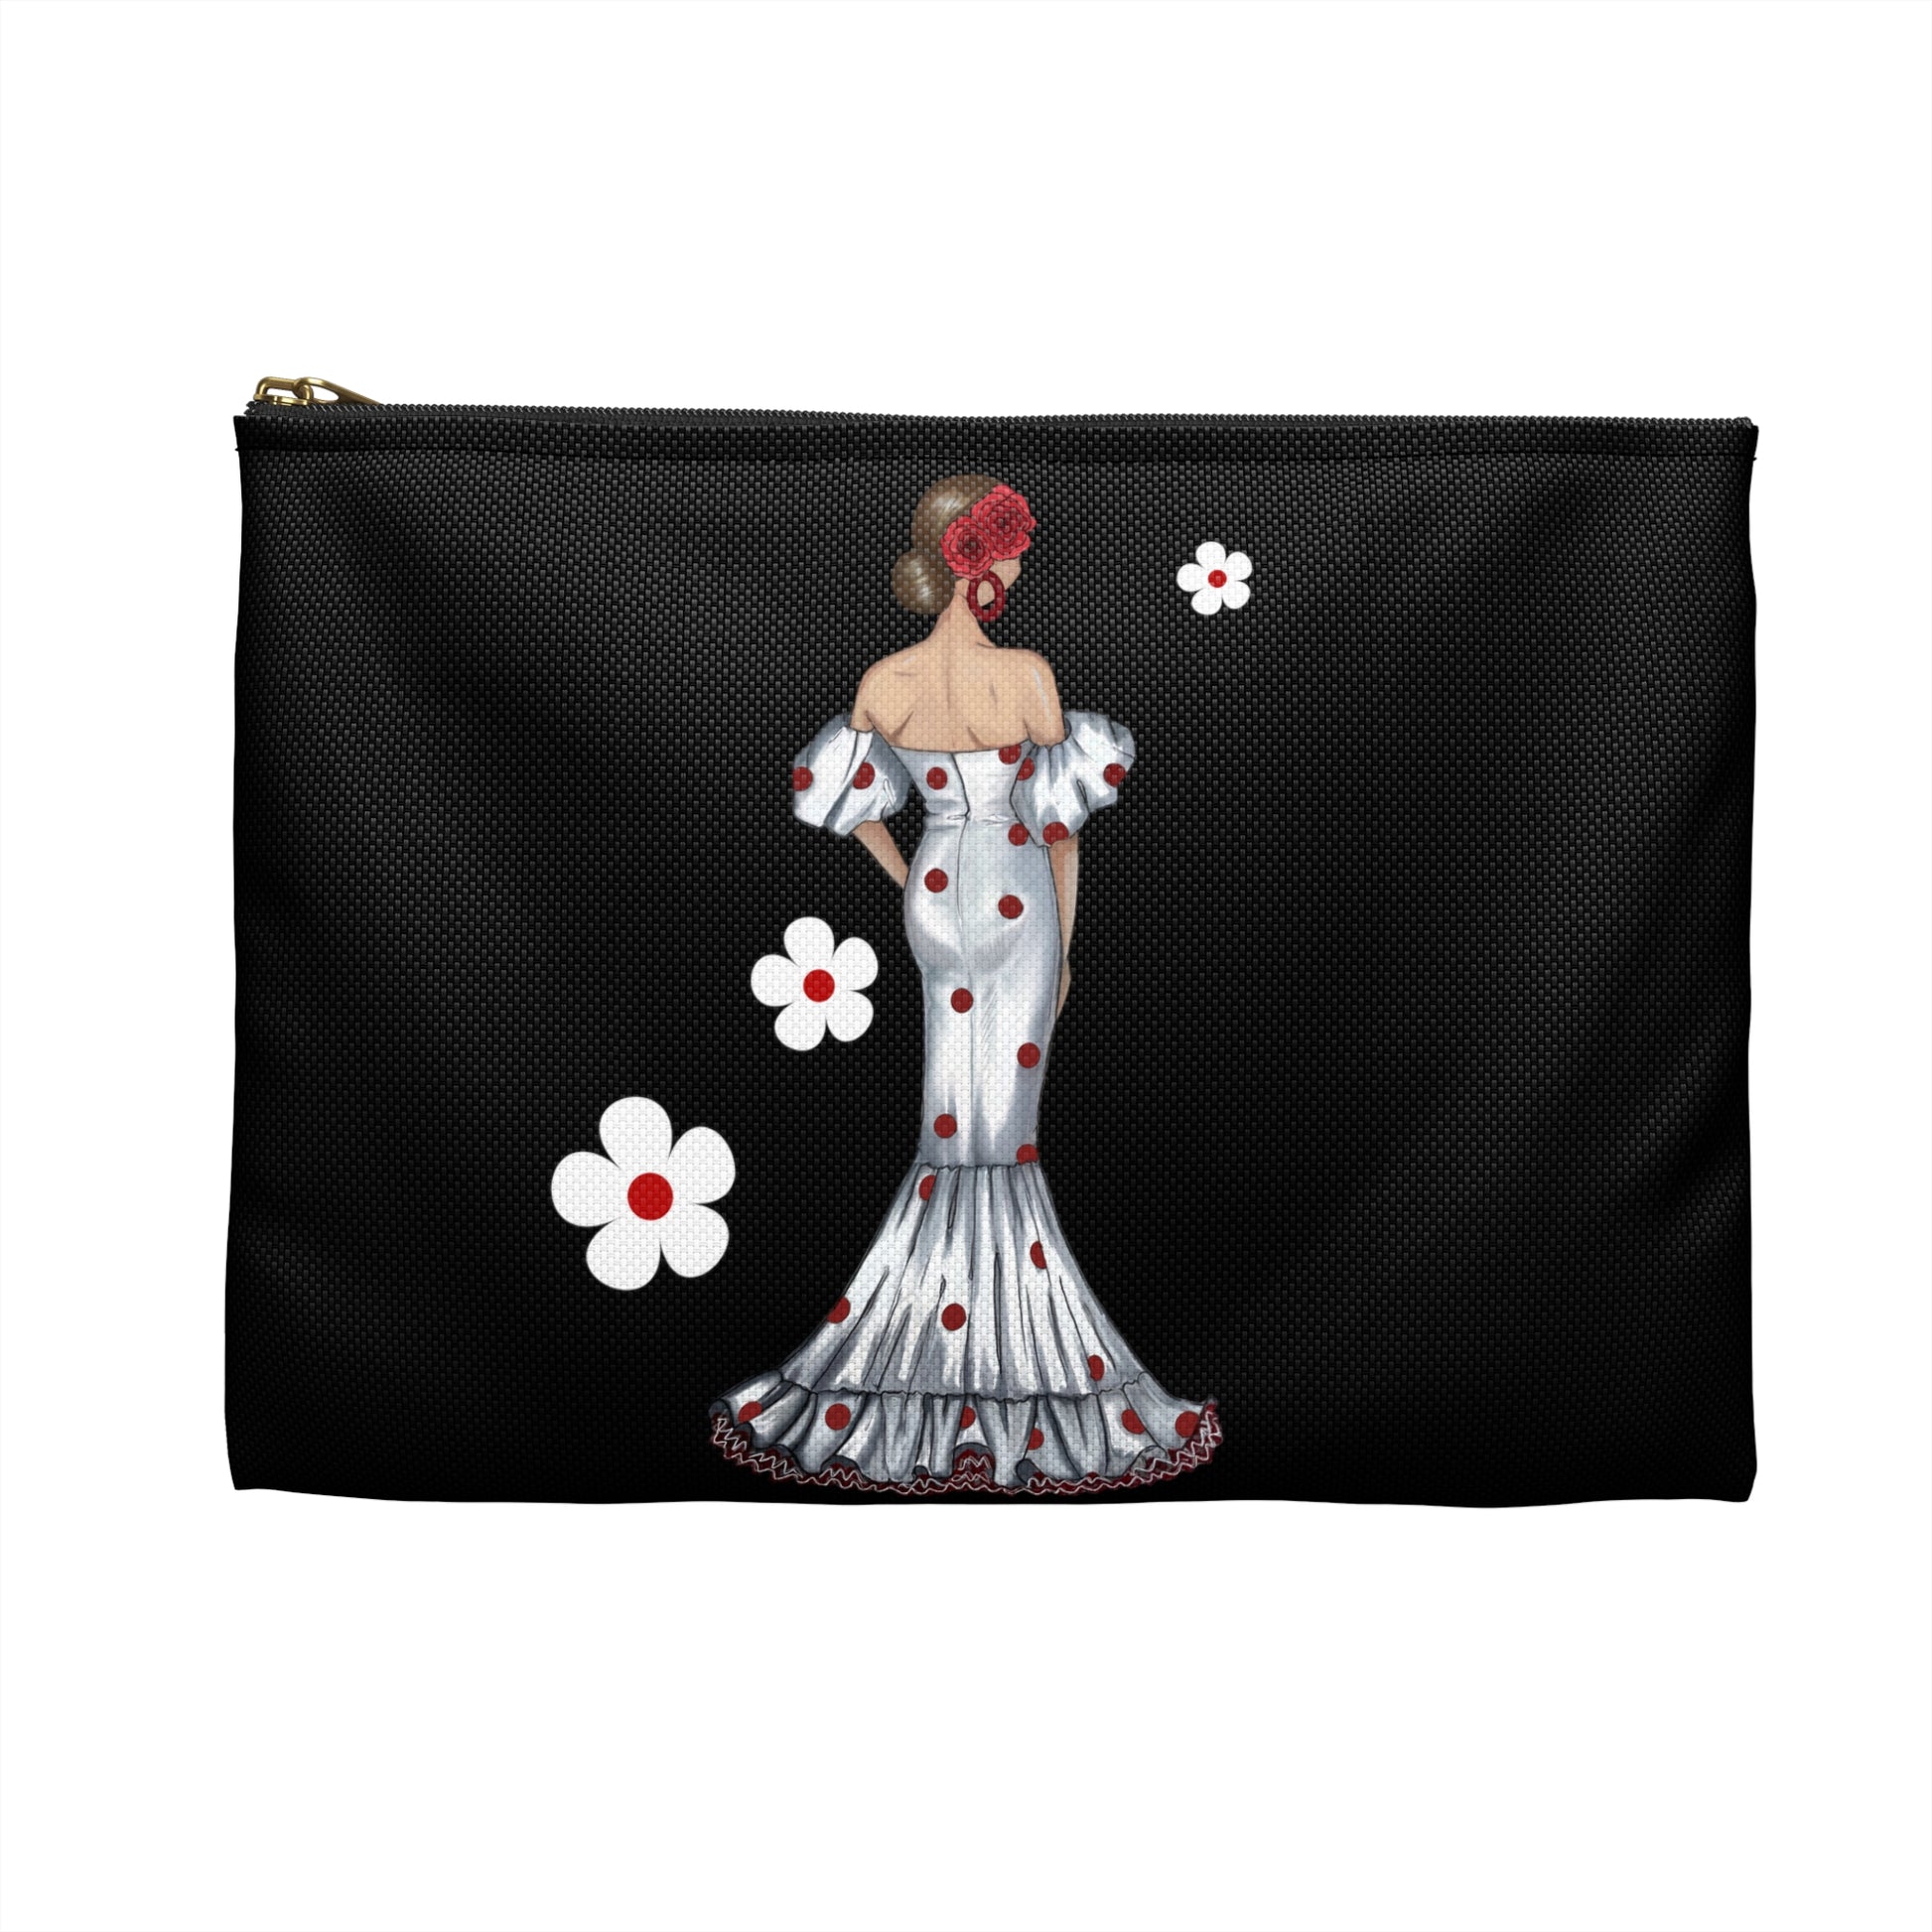 a black purse with a woman in a dress and flowers on it